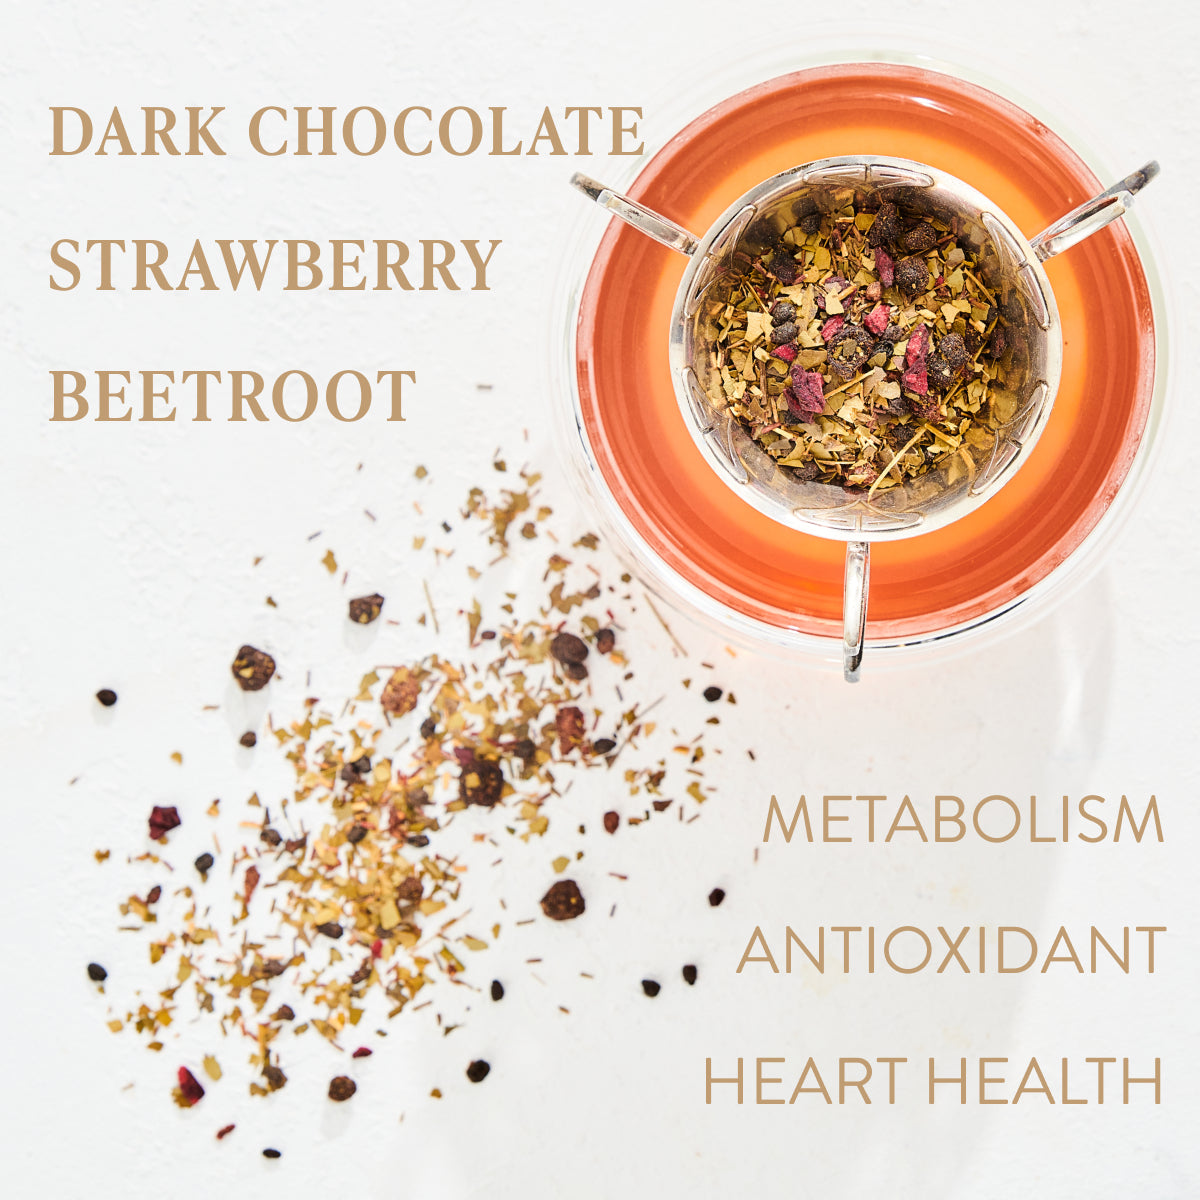 A glass cup filled with Magic Hour Queen of the Rainforest : Cacao-Berry Tea, a blend of dried herbs and fruits, is placed on a white surface. Some of the loose leaf tea is scattered around the cup. Text reads "Dark Chocolate, Strawberry, Beetroot" and "Metabolism, Antioxidant, Heart Health.